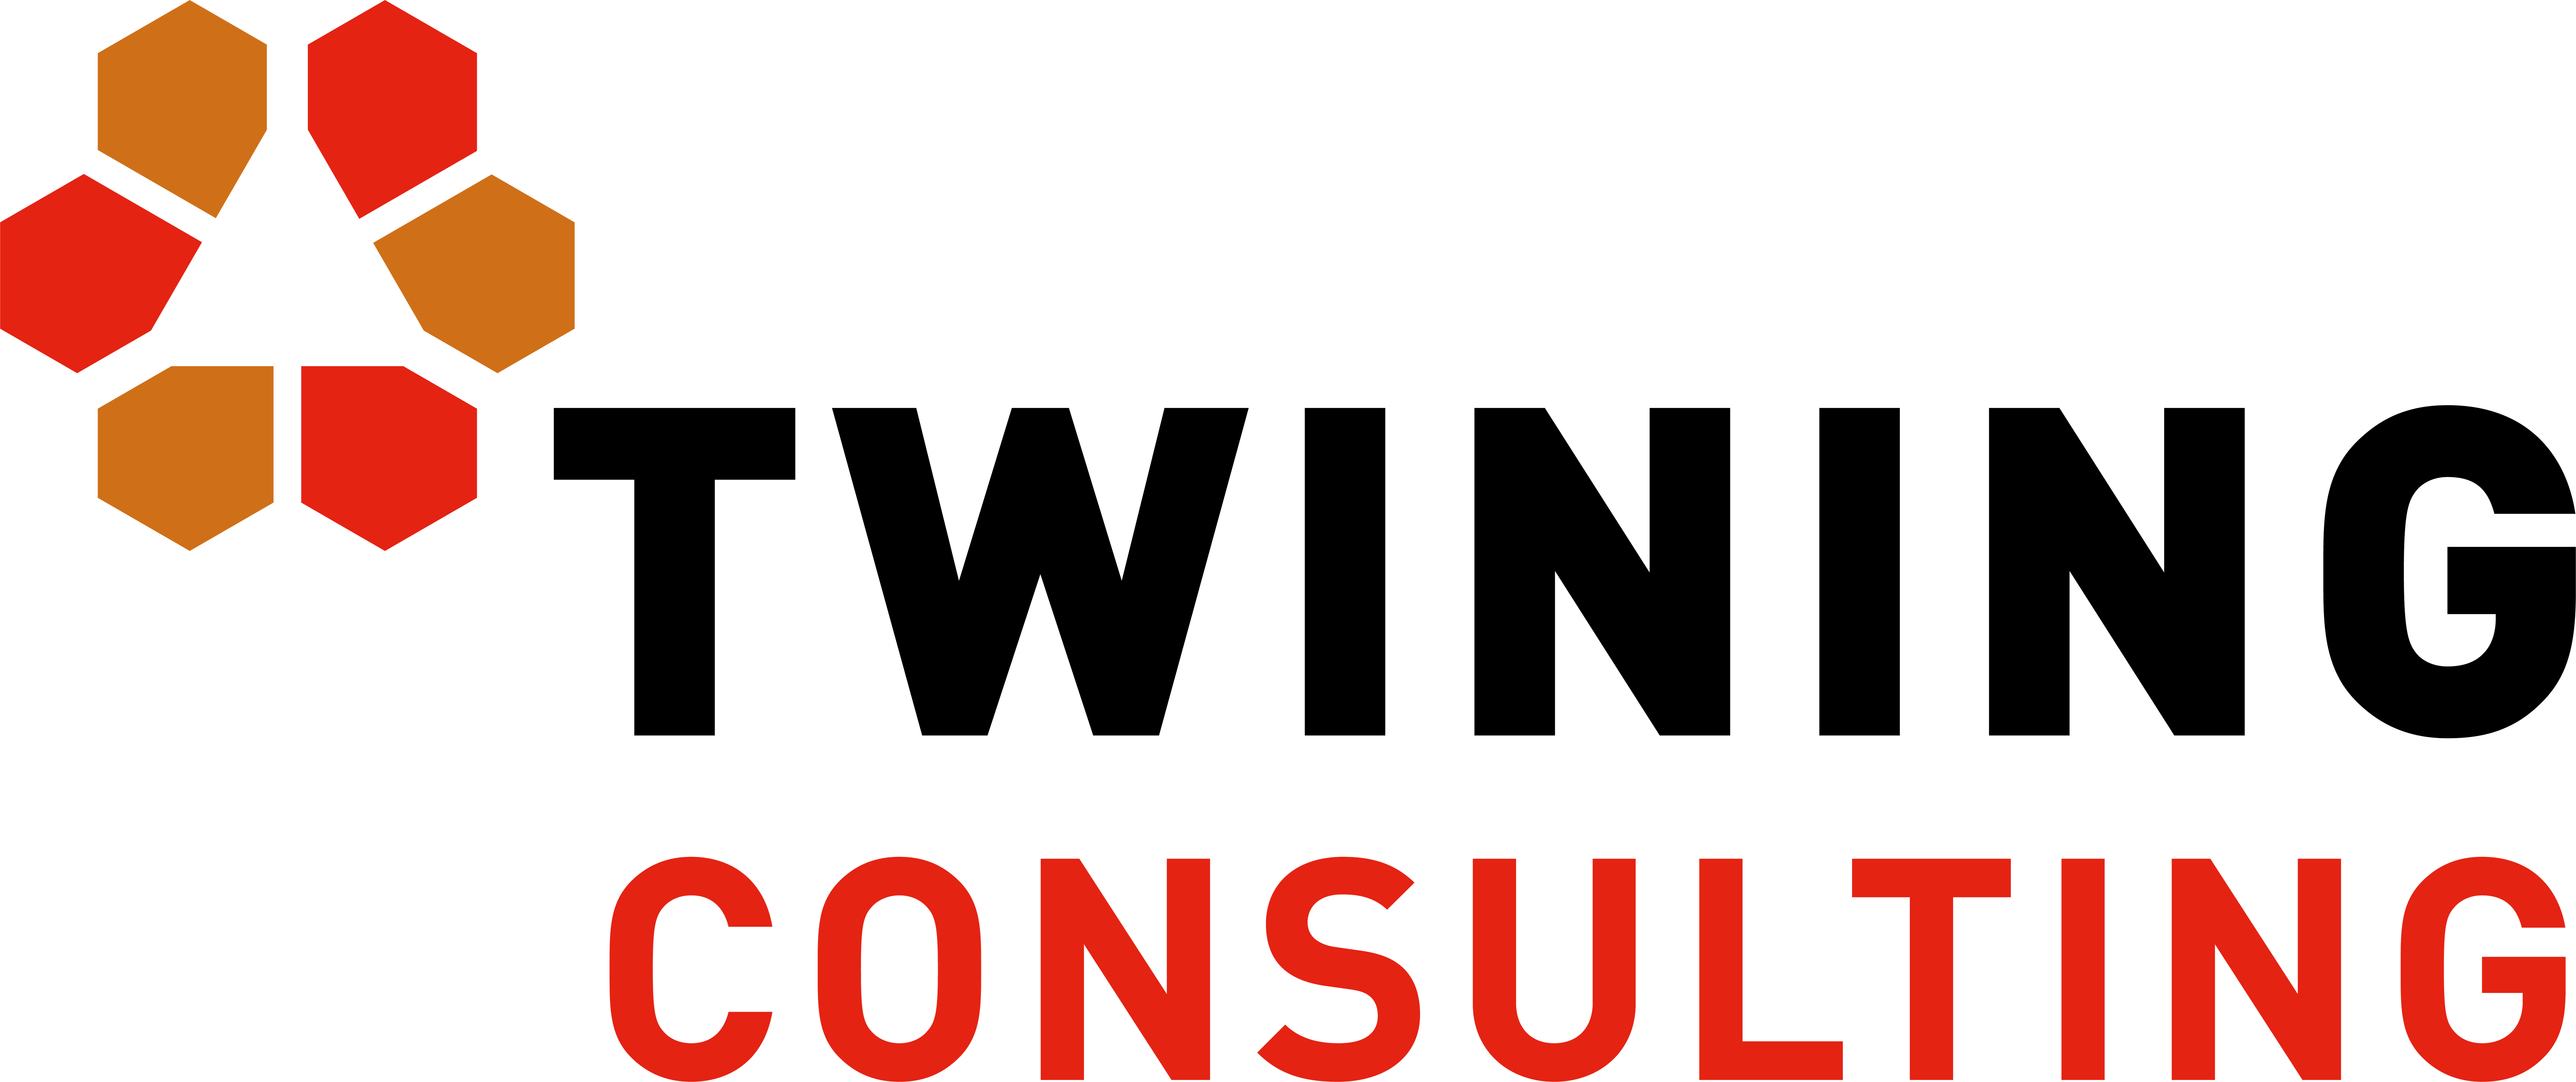 Twining Consulting